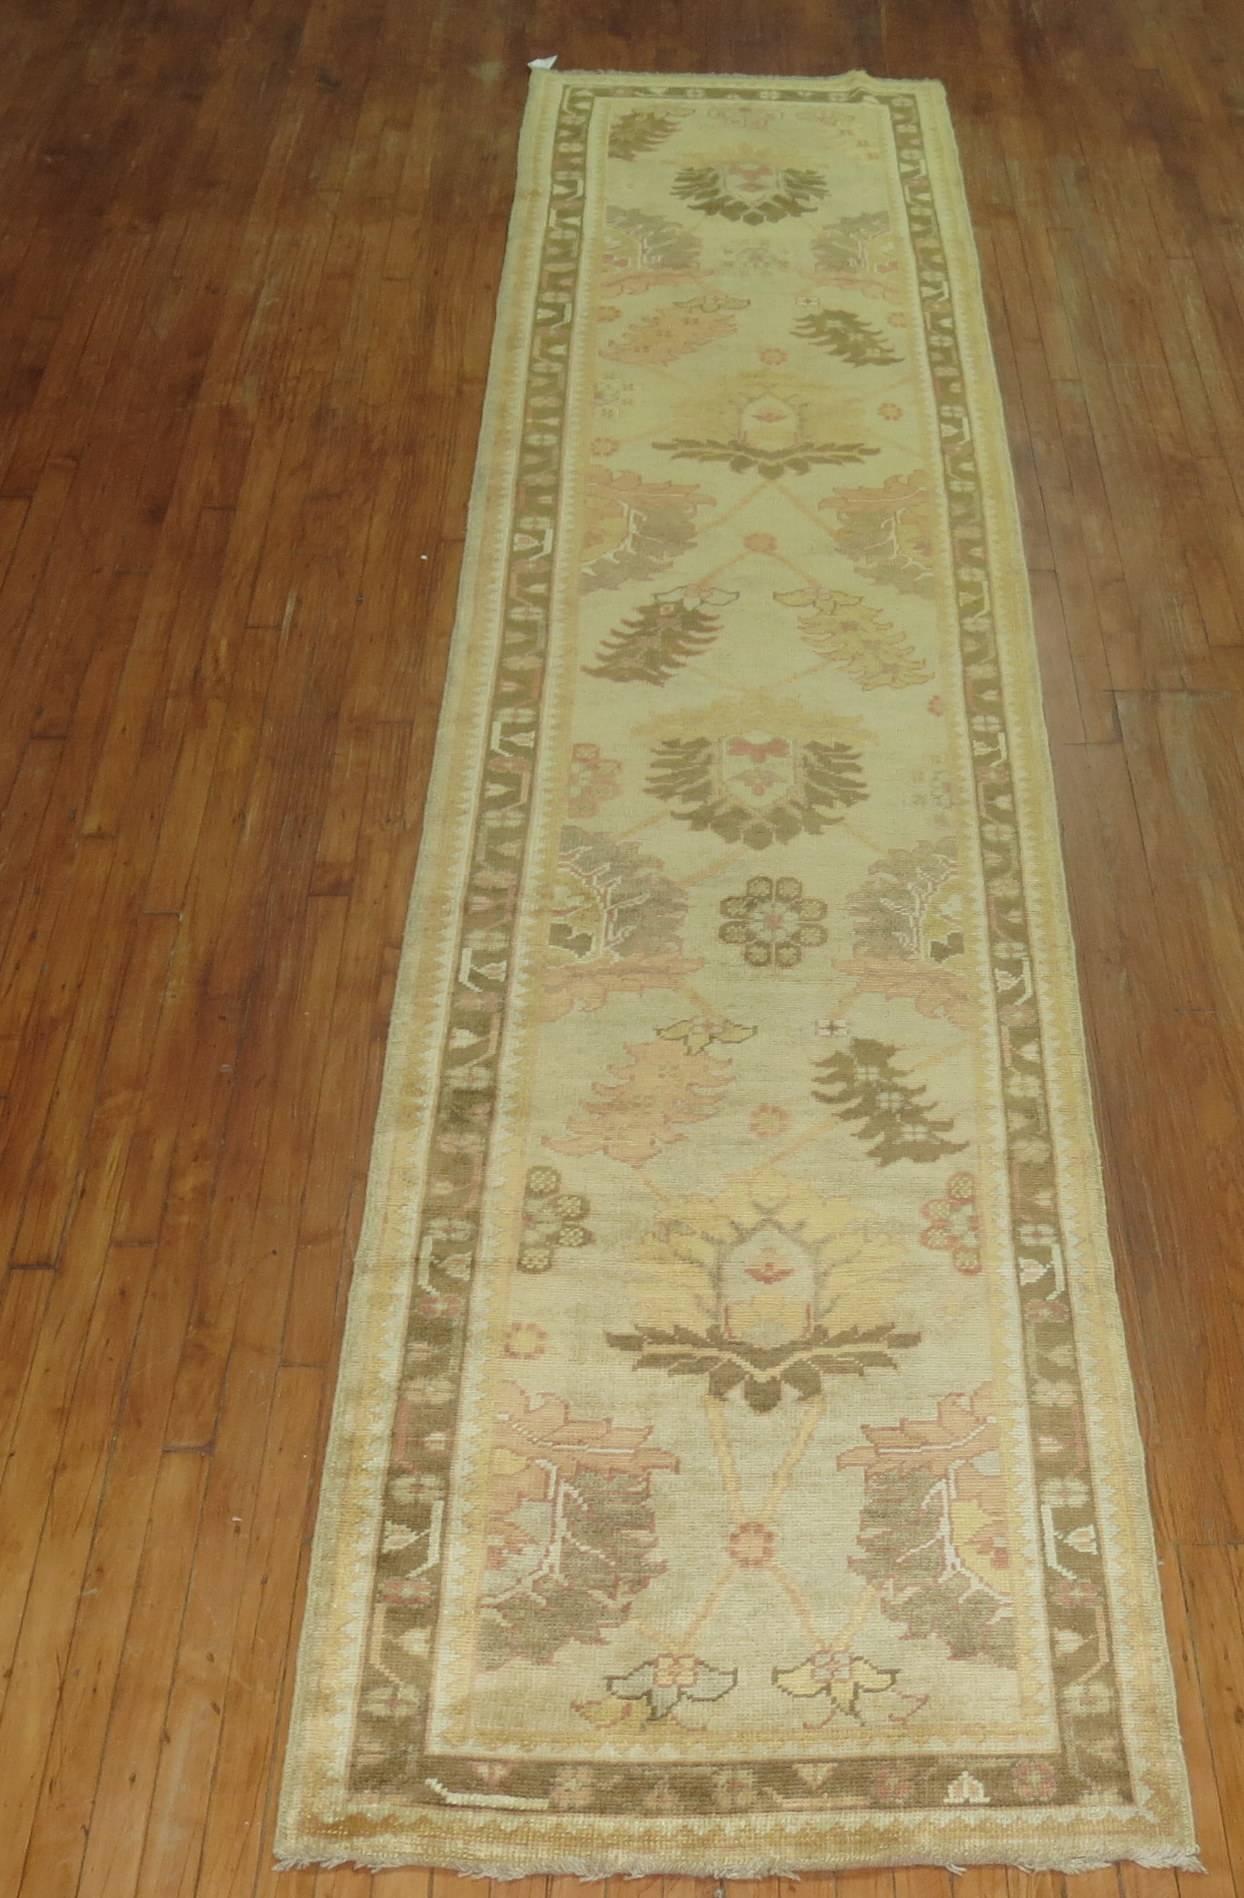 Turn of the 21st century Turkish Oushak runner predominantly khaki and brown. Handmade with recycled vegetable dyed wool used in mid-20th century Turkish Oushak rugs.

Measures: 3'1'' x 15'2''.